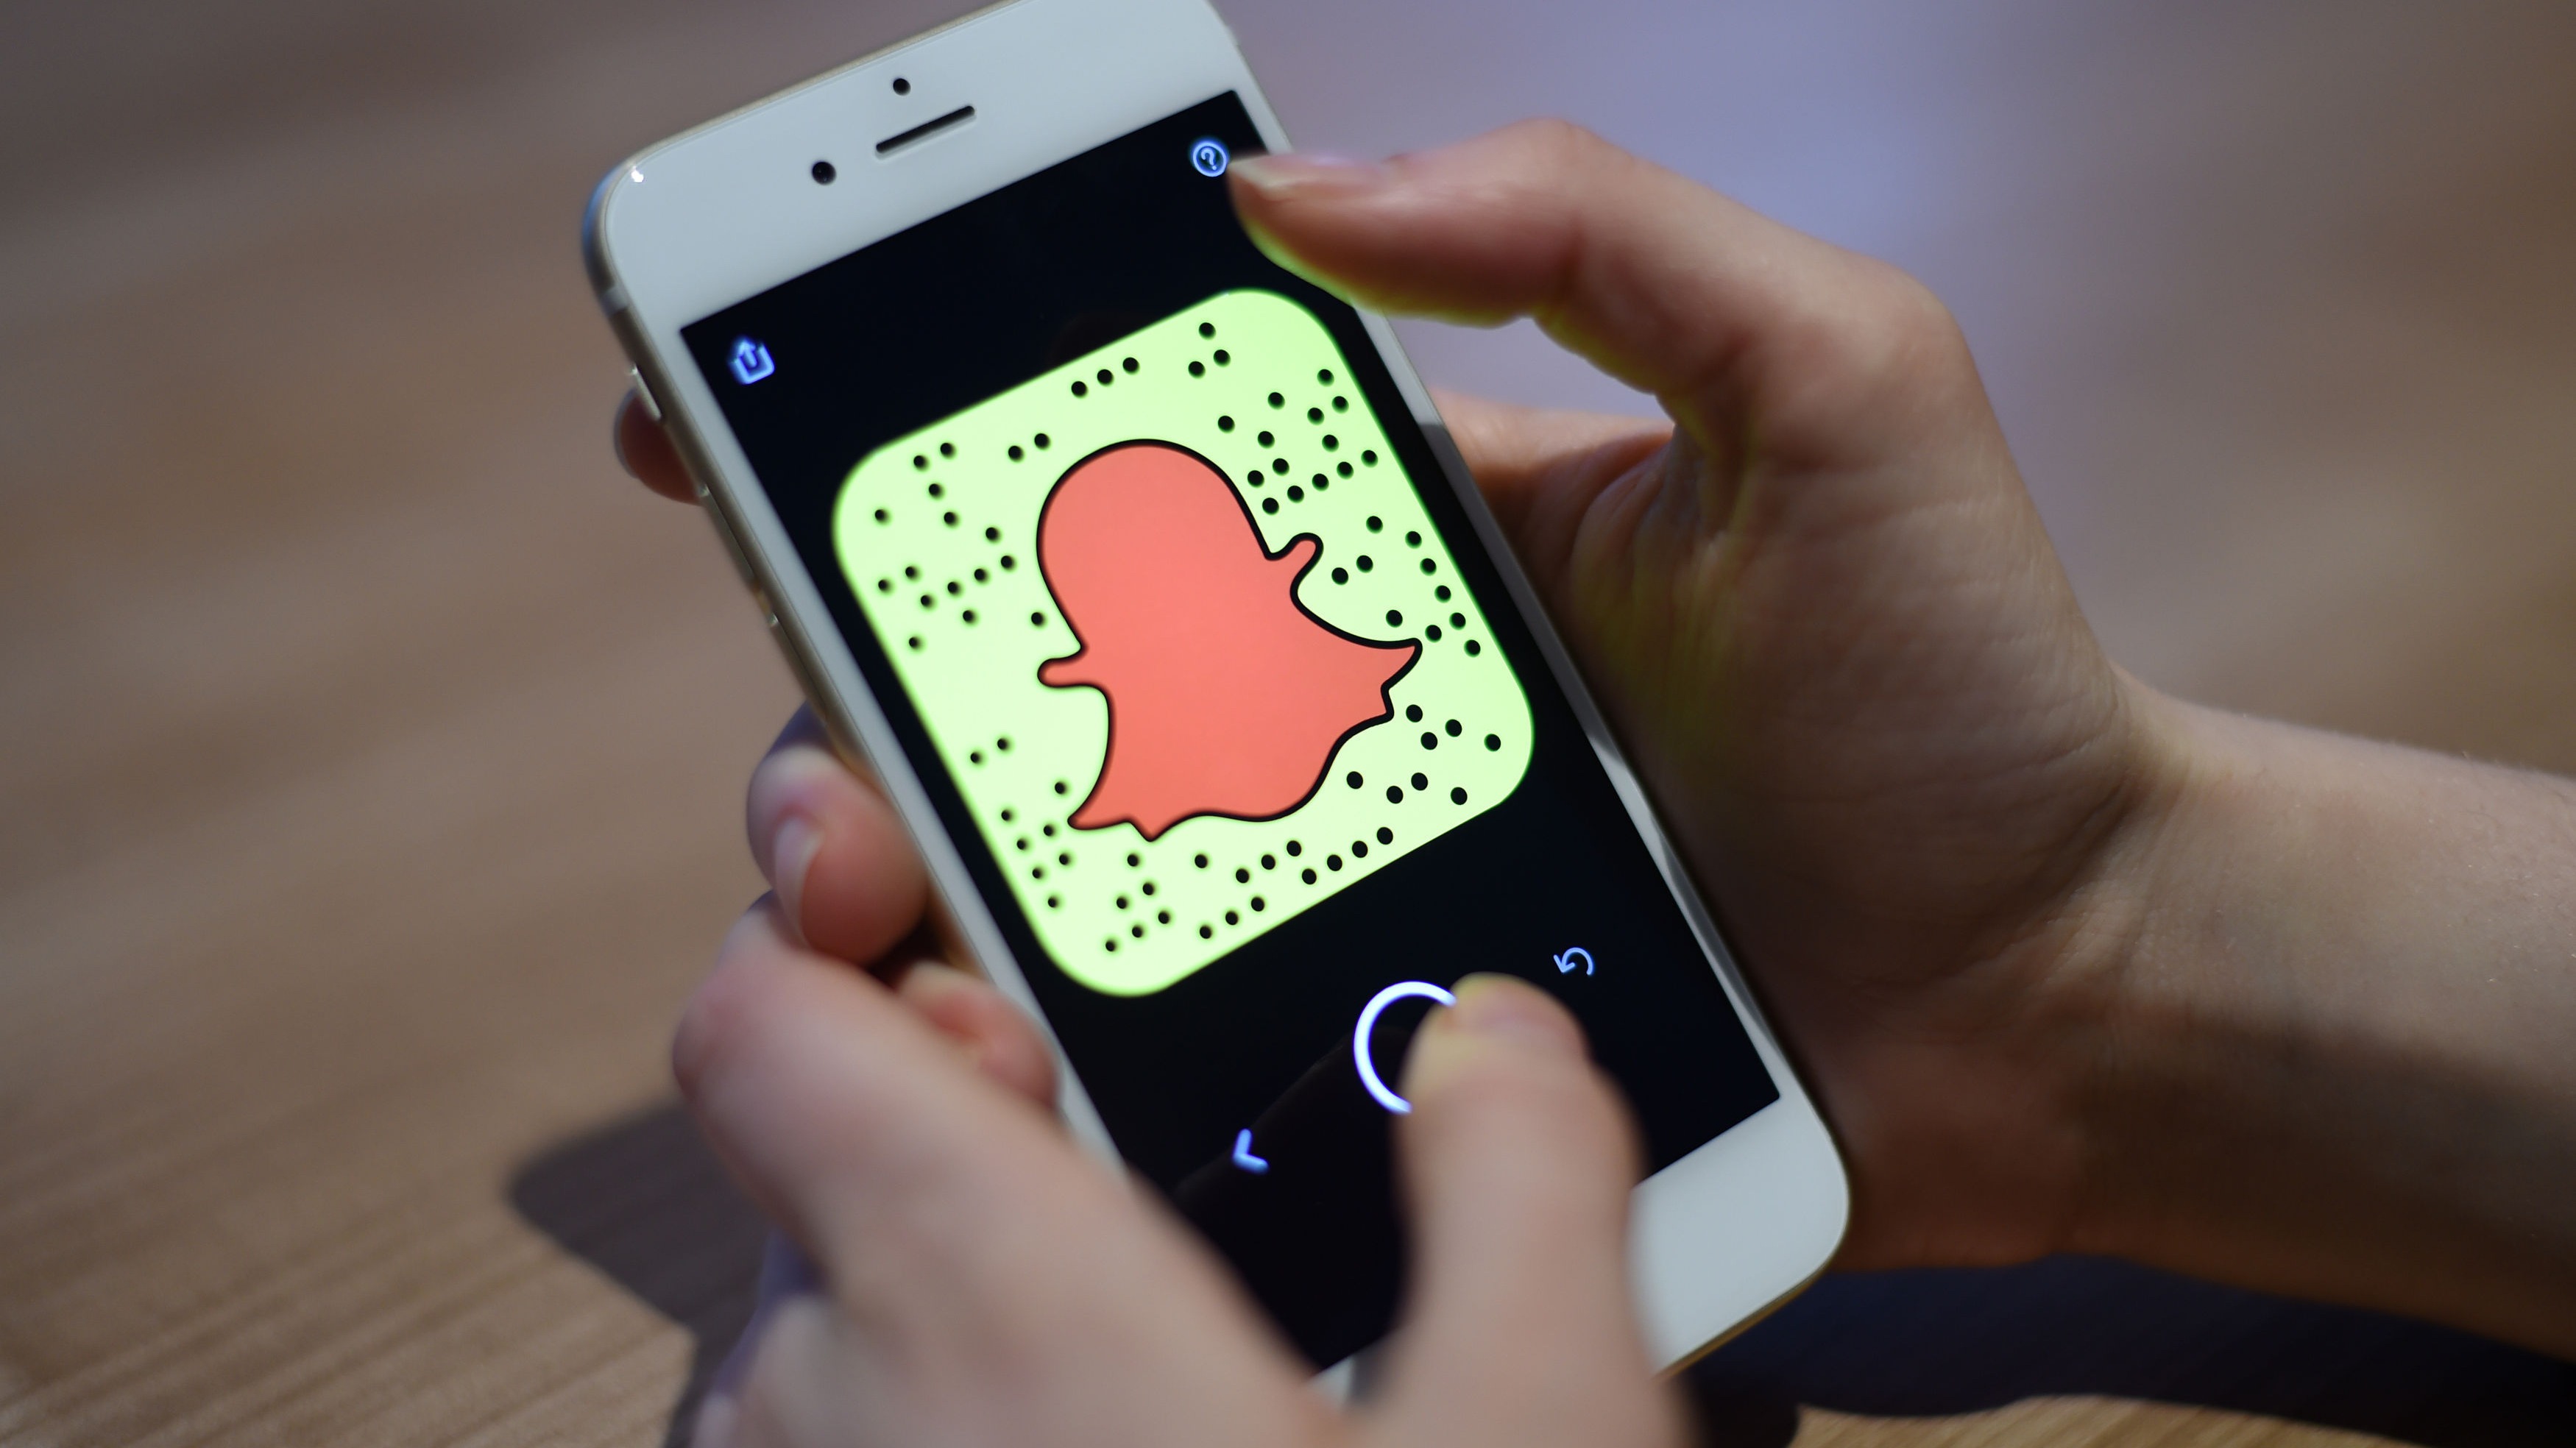 Snapchat back up after not working as users reported problems logging